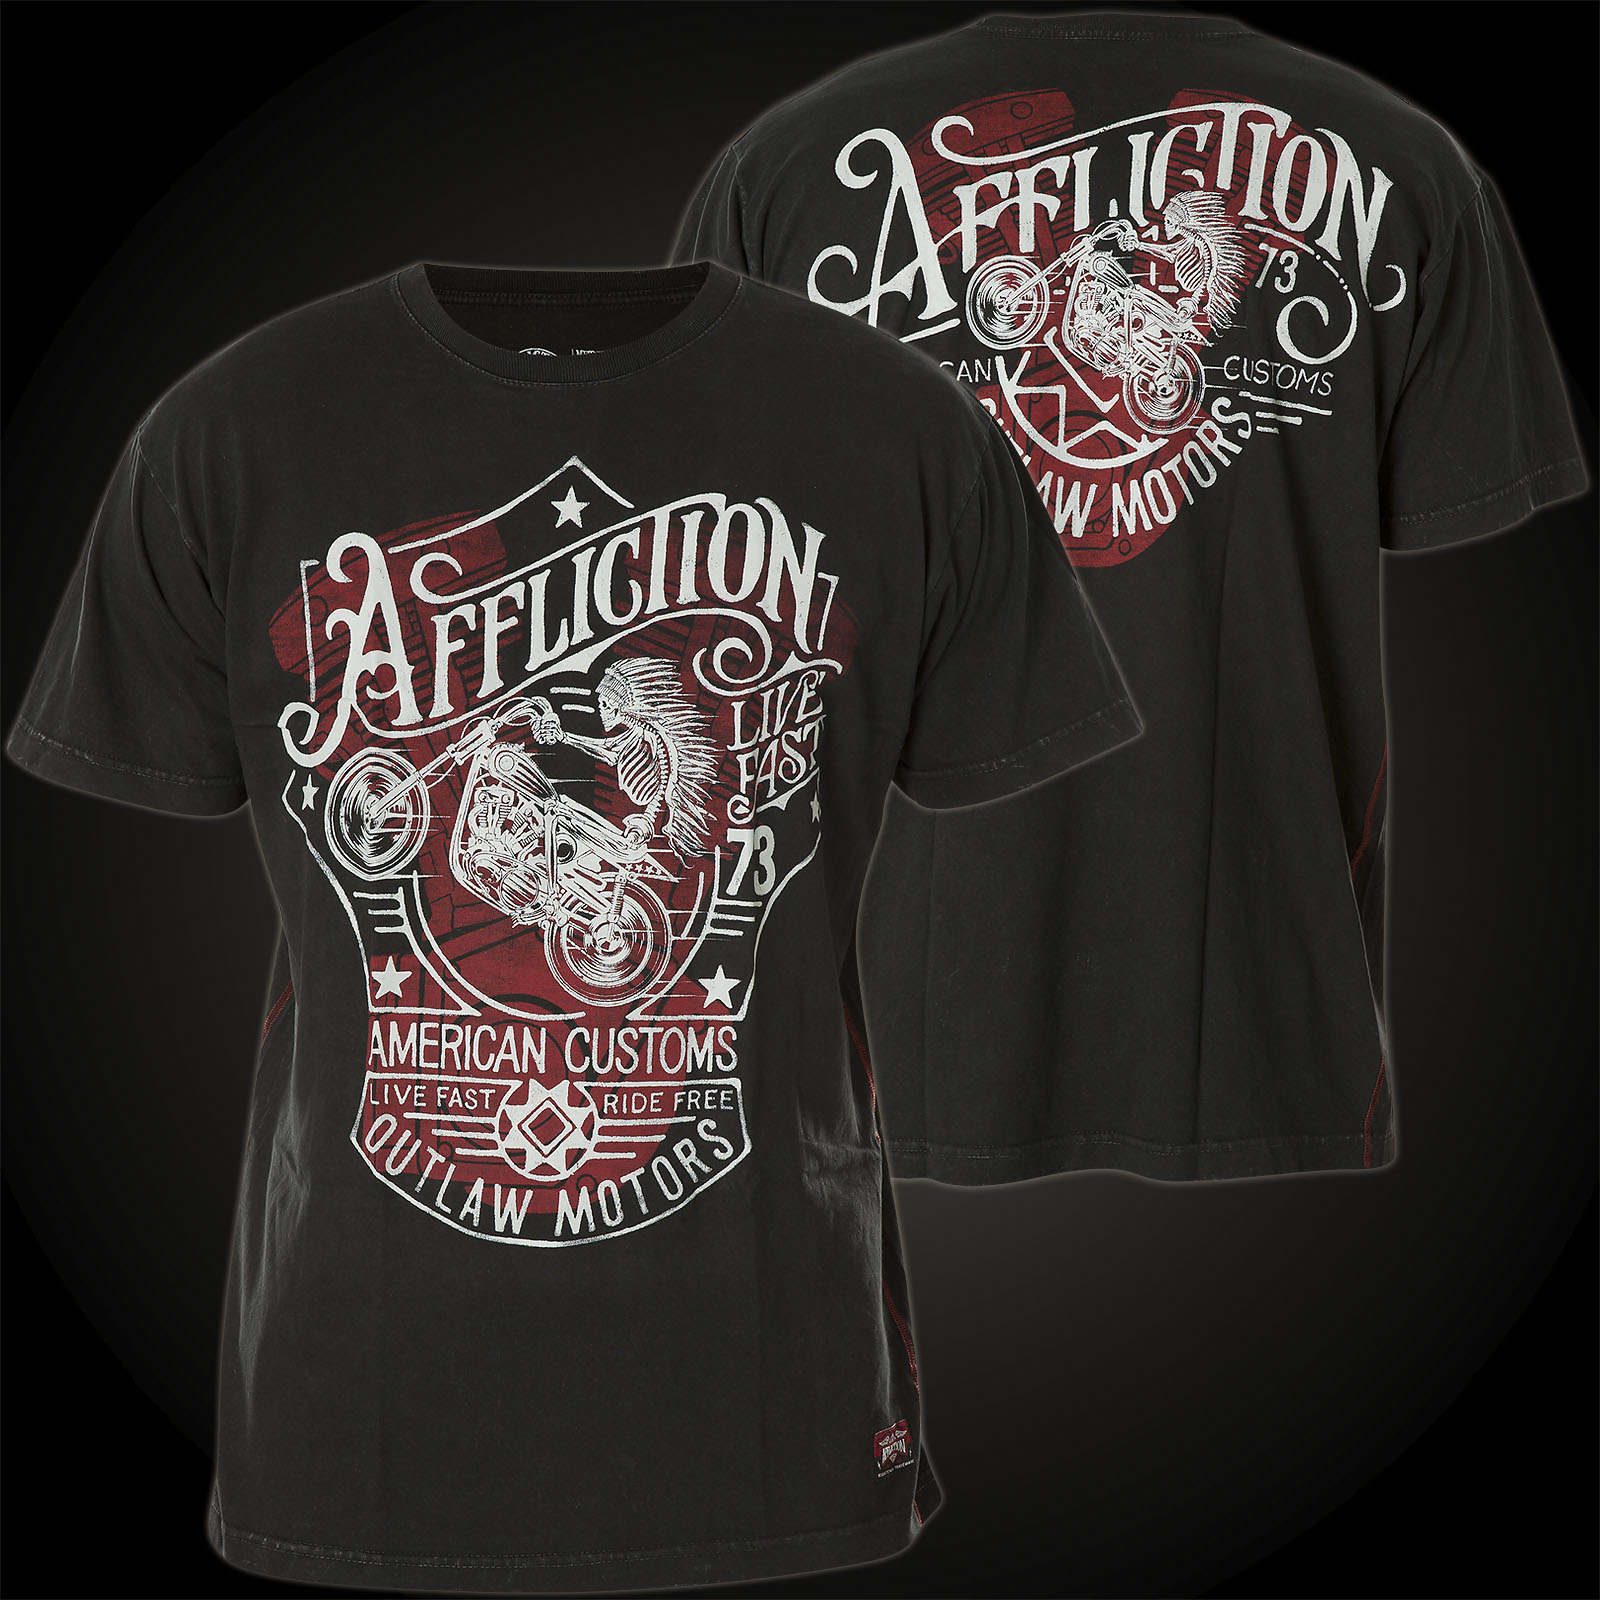 Affliction T-Shirt Snake River Outlaw Print with a motorcycle